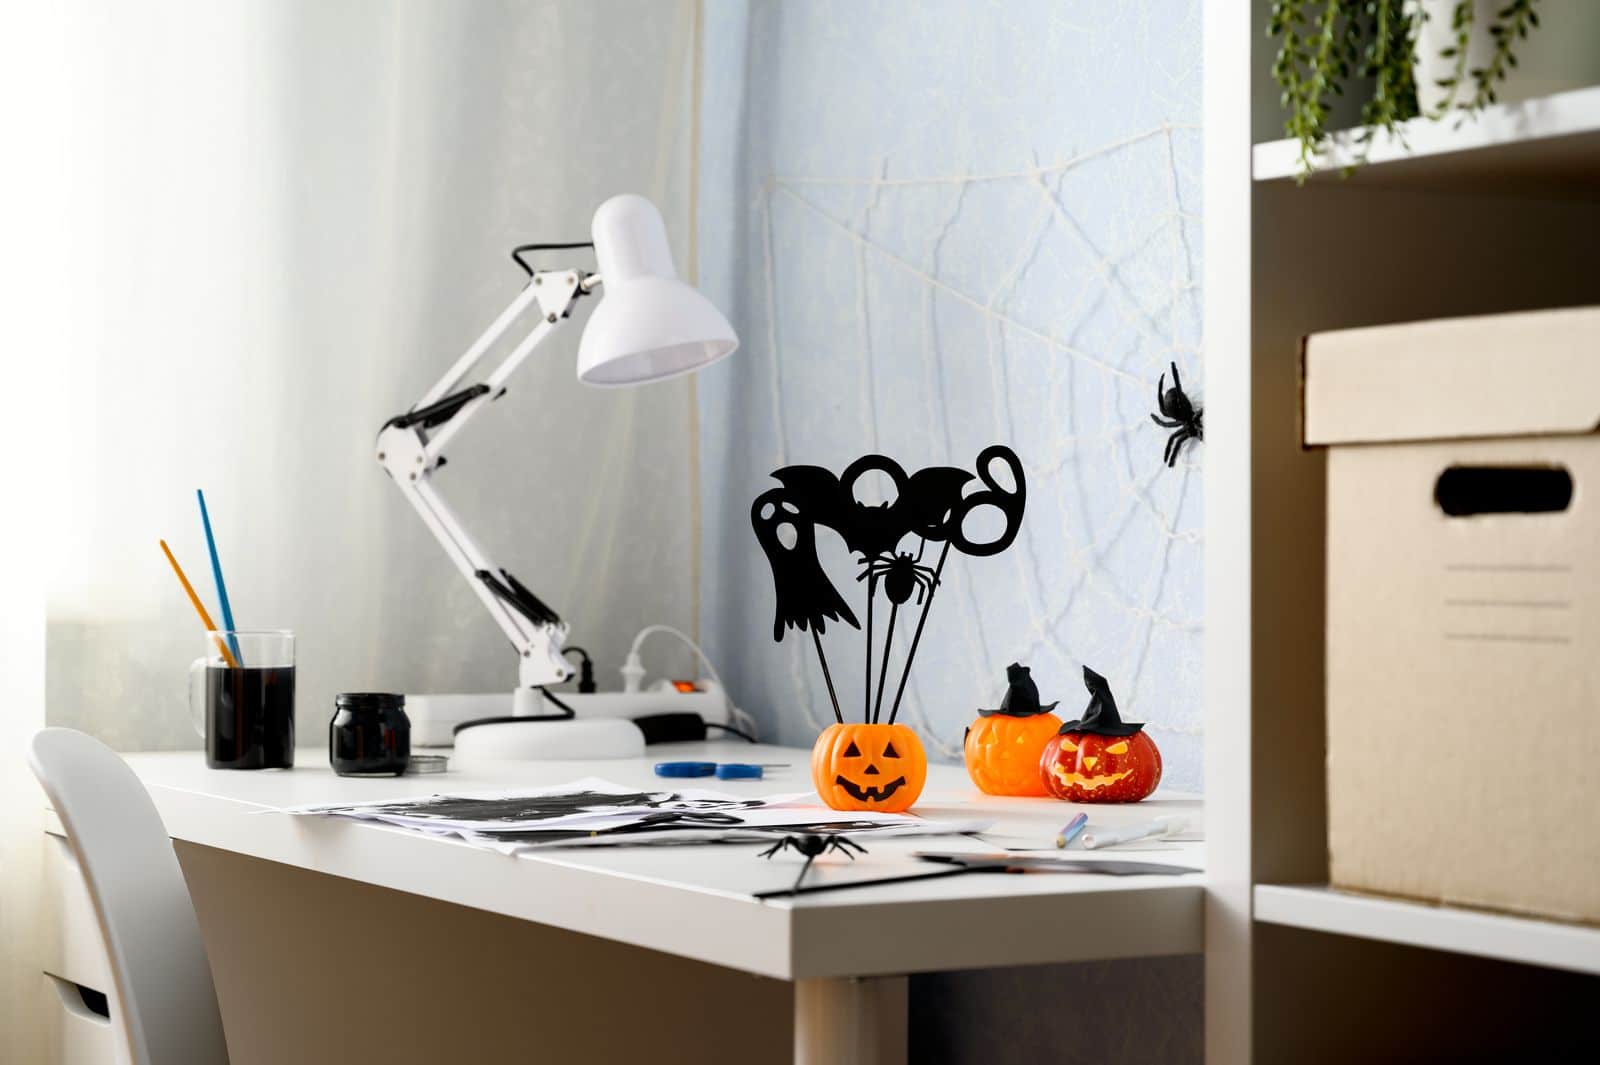 Home office desk with Halloween decorations